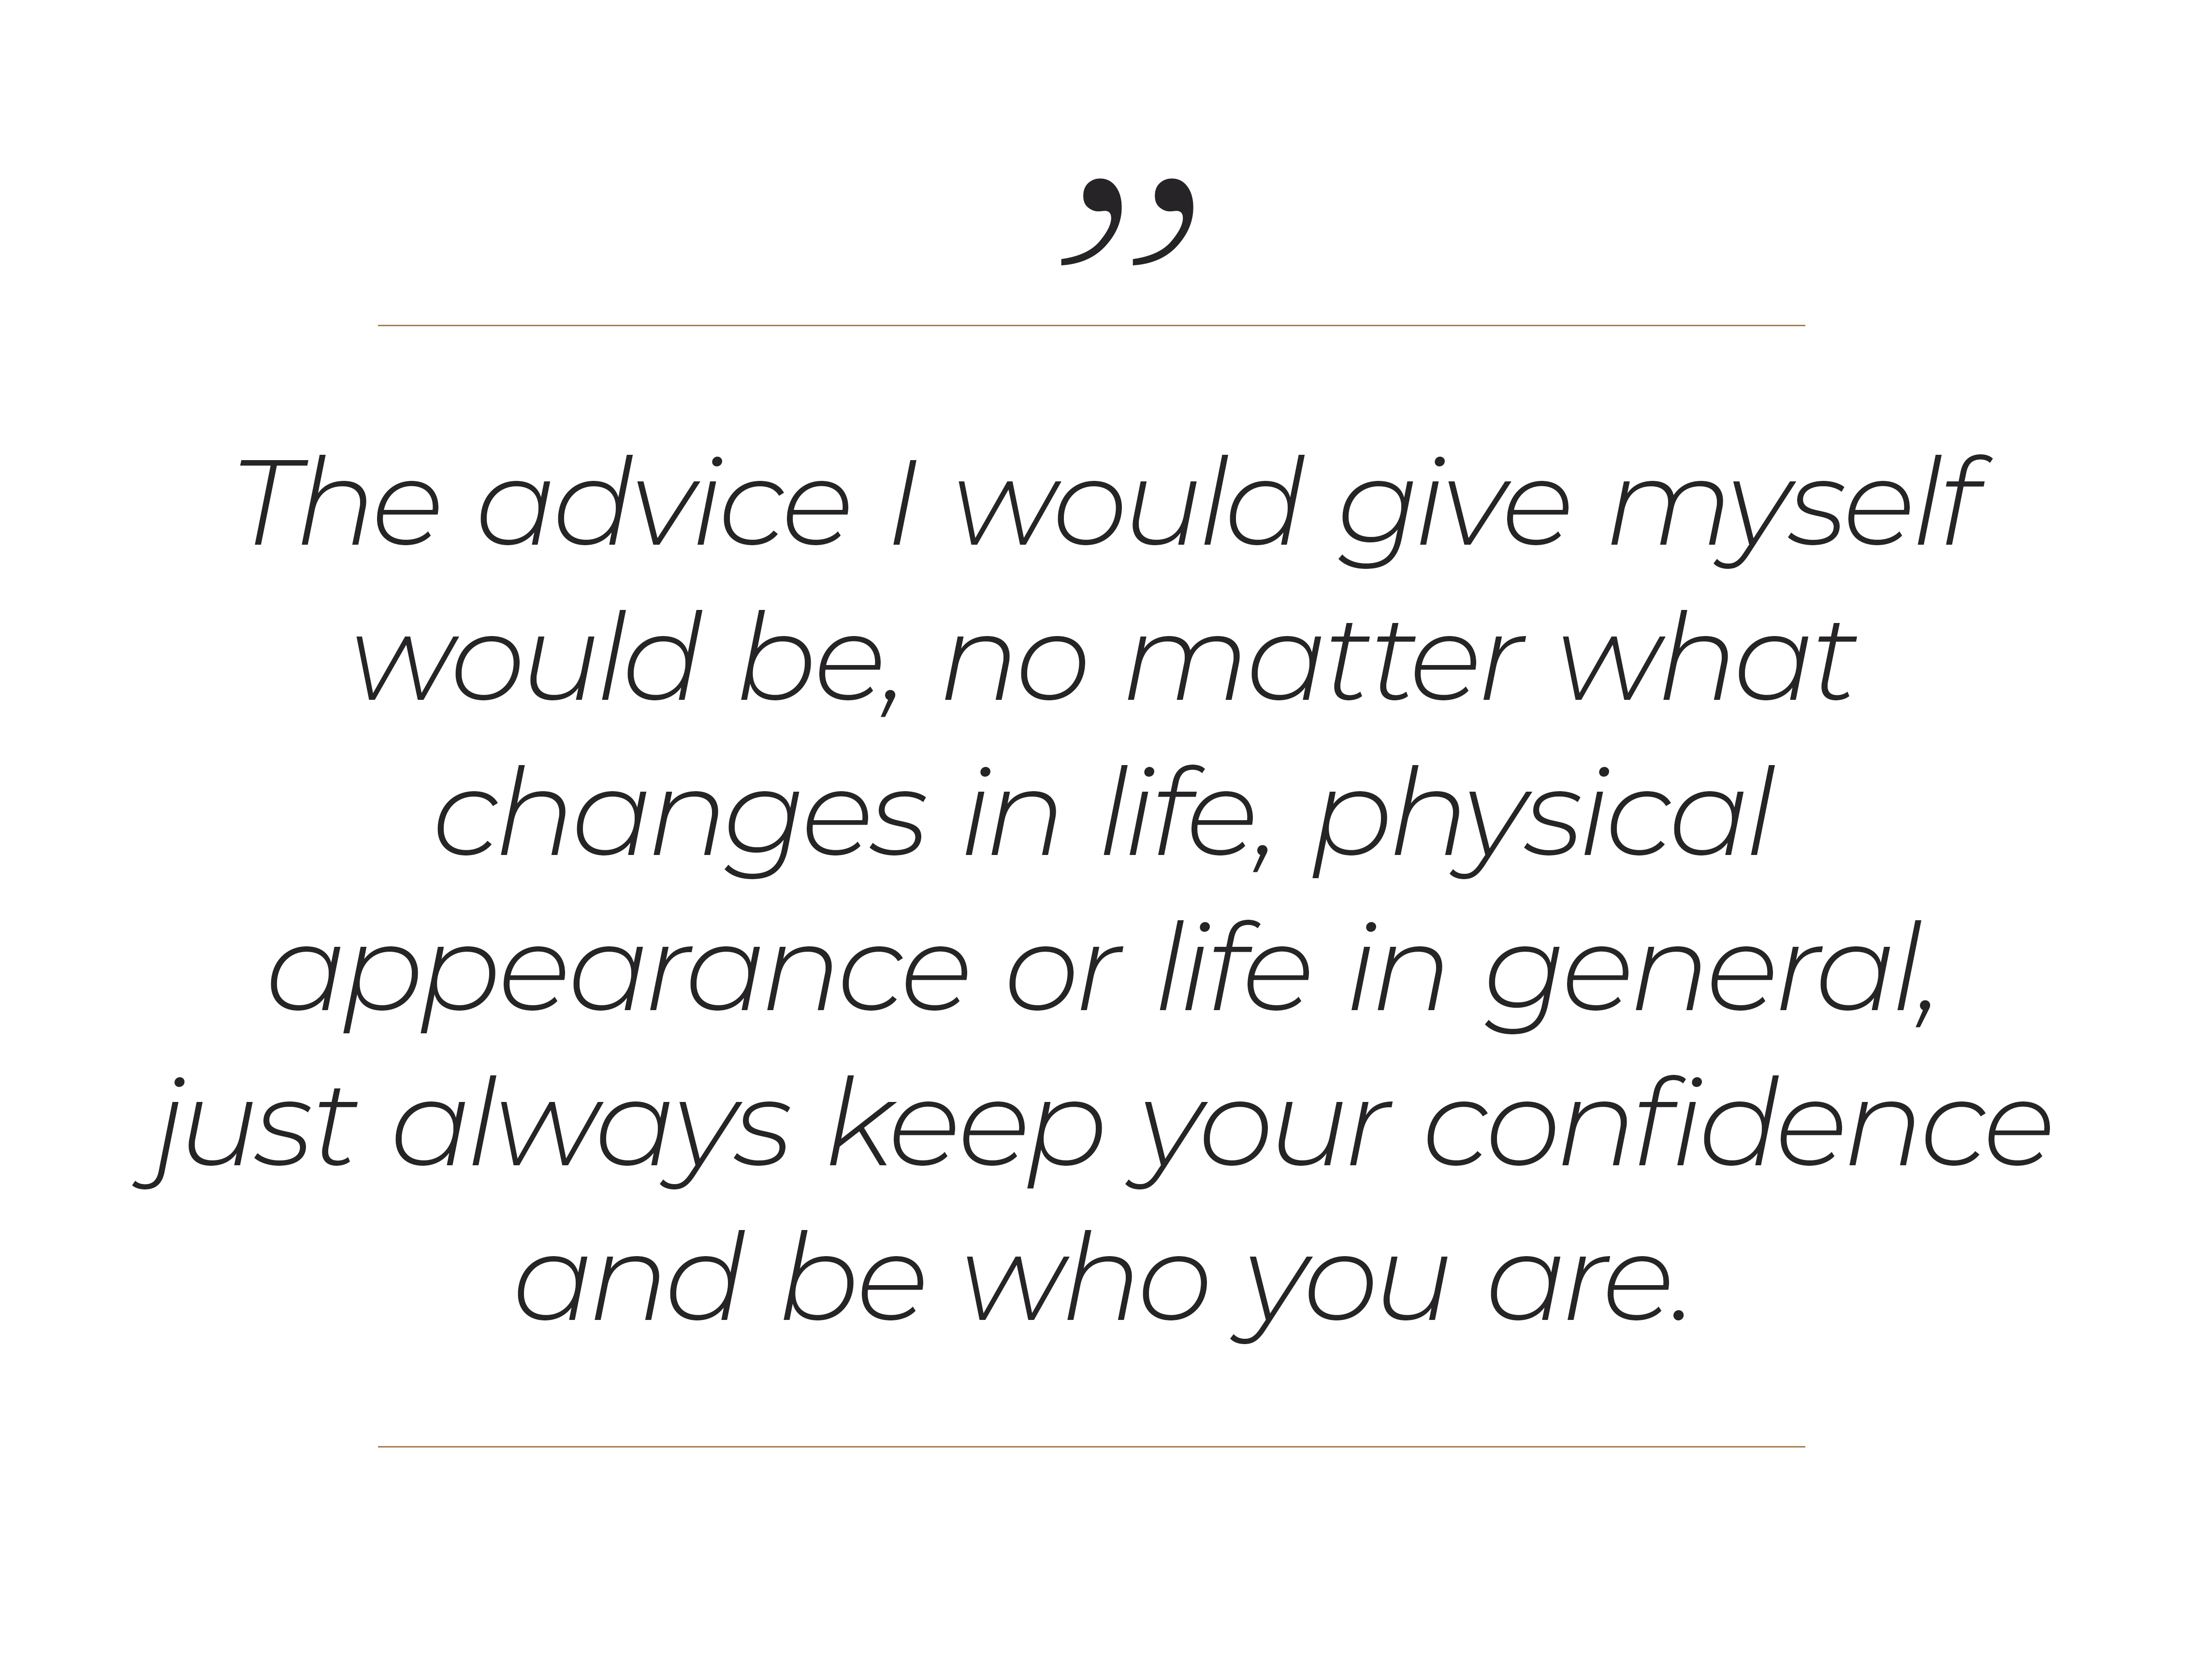 "The advice I would give myself would be, no matter what changes in life, physical appearance or life in general, just always keep your confidence and be who you are. "